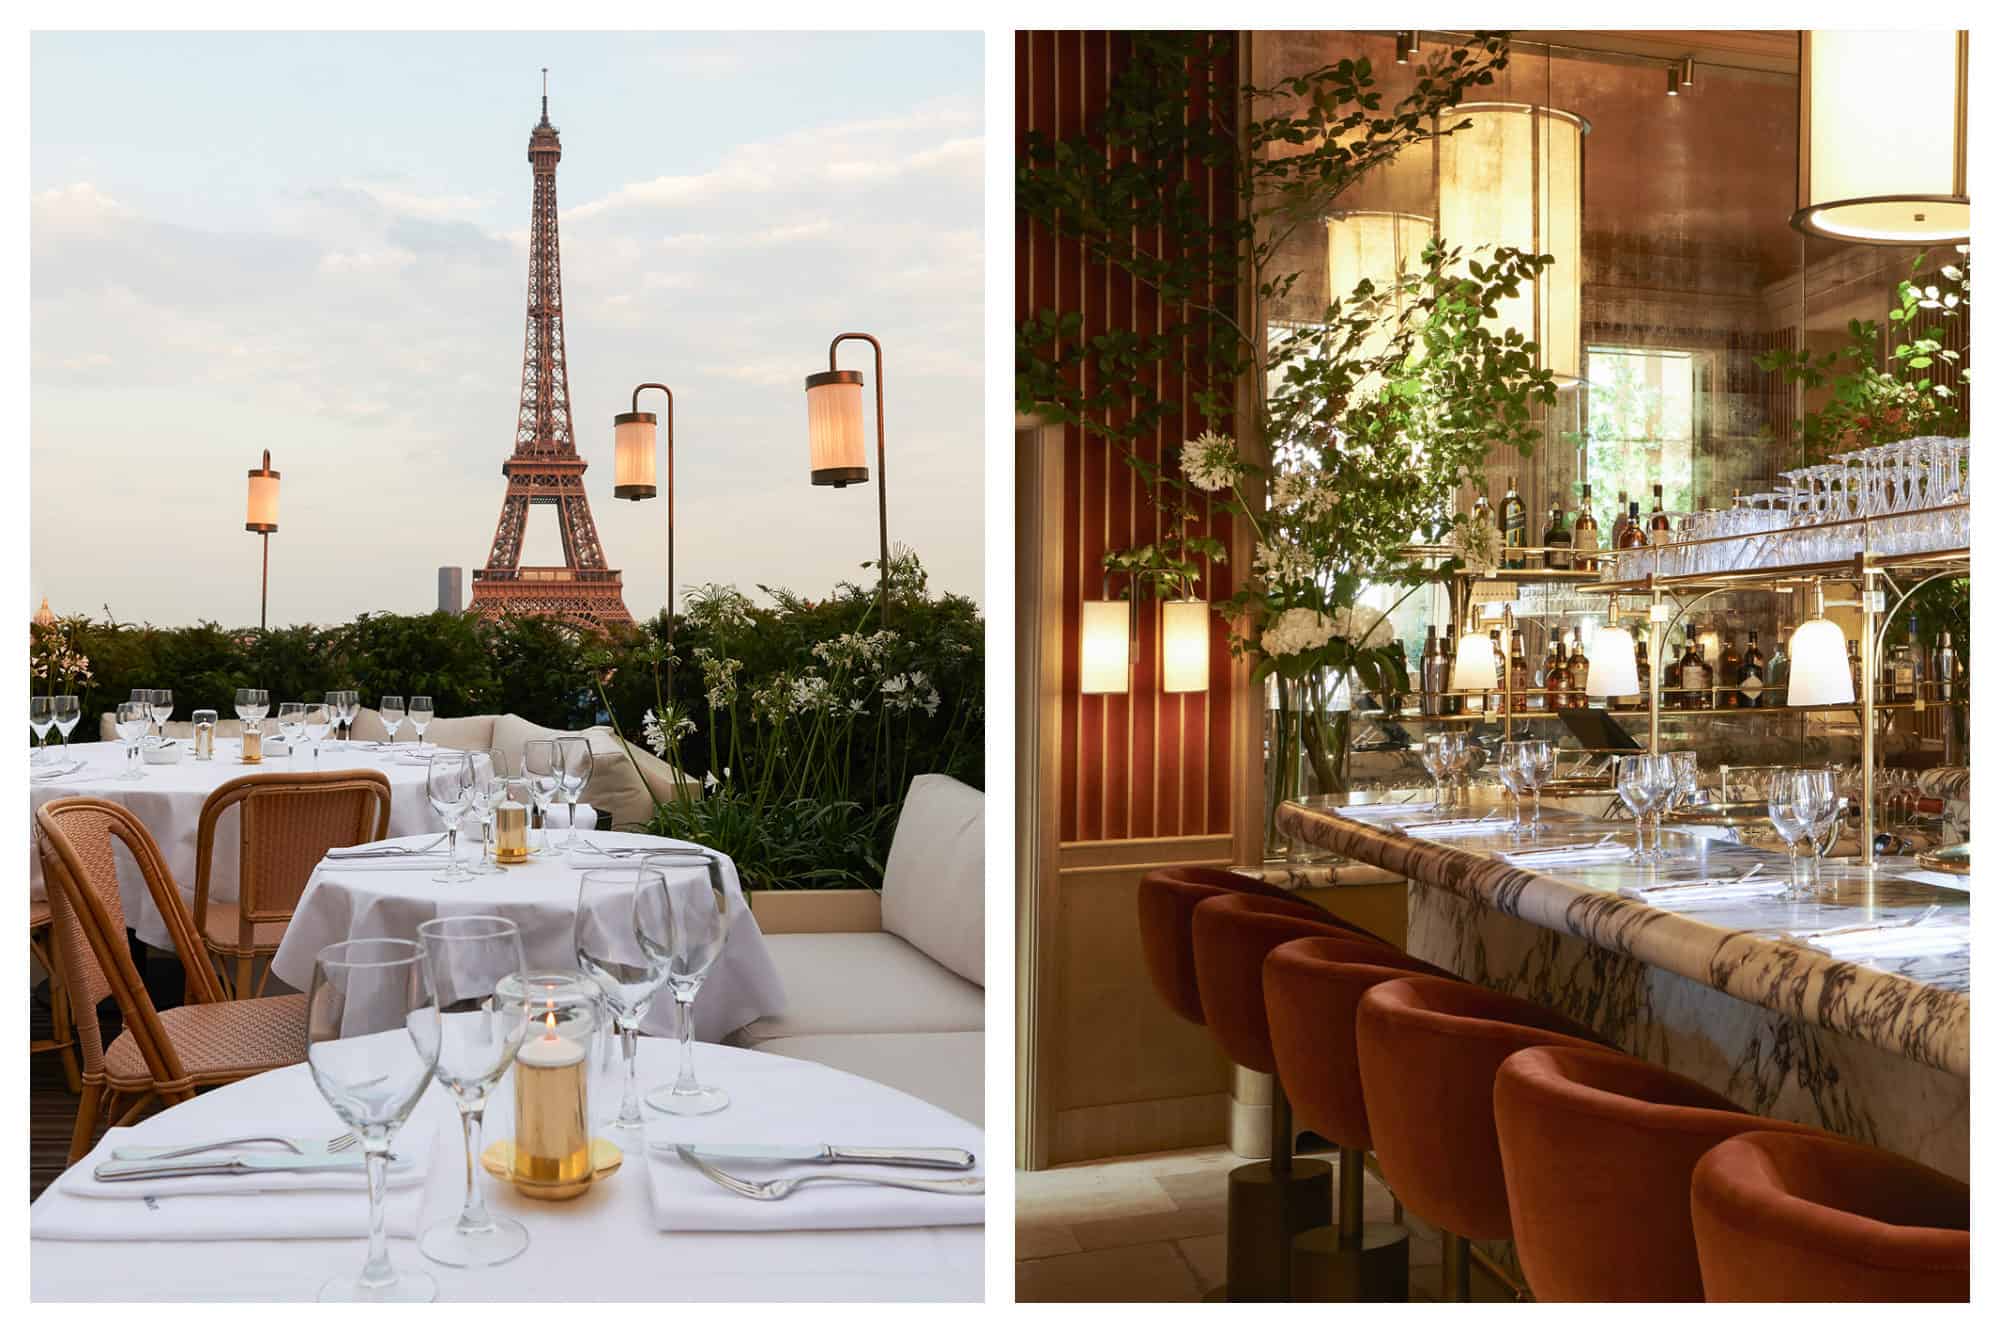 Tables dressed in crisp white tablecloths with an Eiffel Tower backdrop (left) and the gorgeous glamorous marble interiors (right) of Girafe restaurant in Paris.